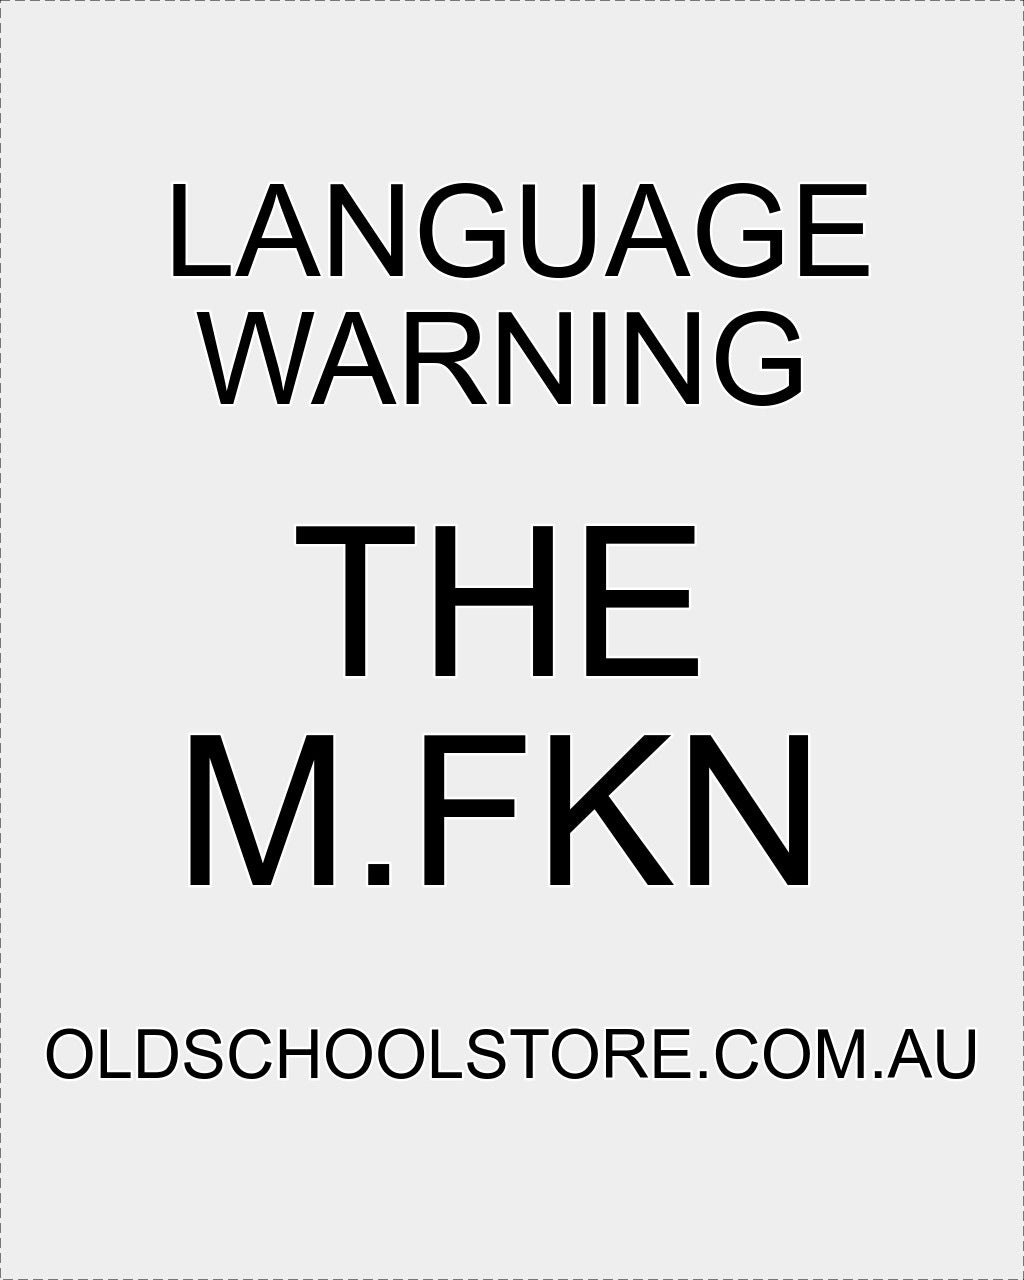 Stick it on Shit Stickers - THE M.F OLDSCHOOL STORE